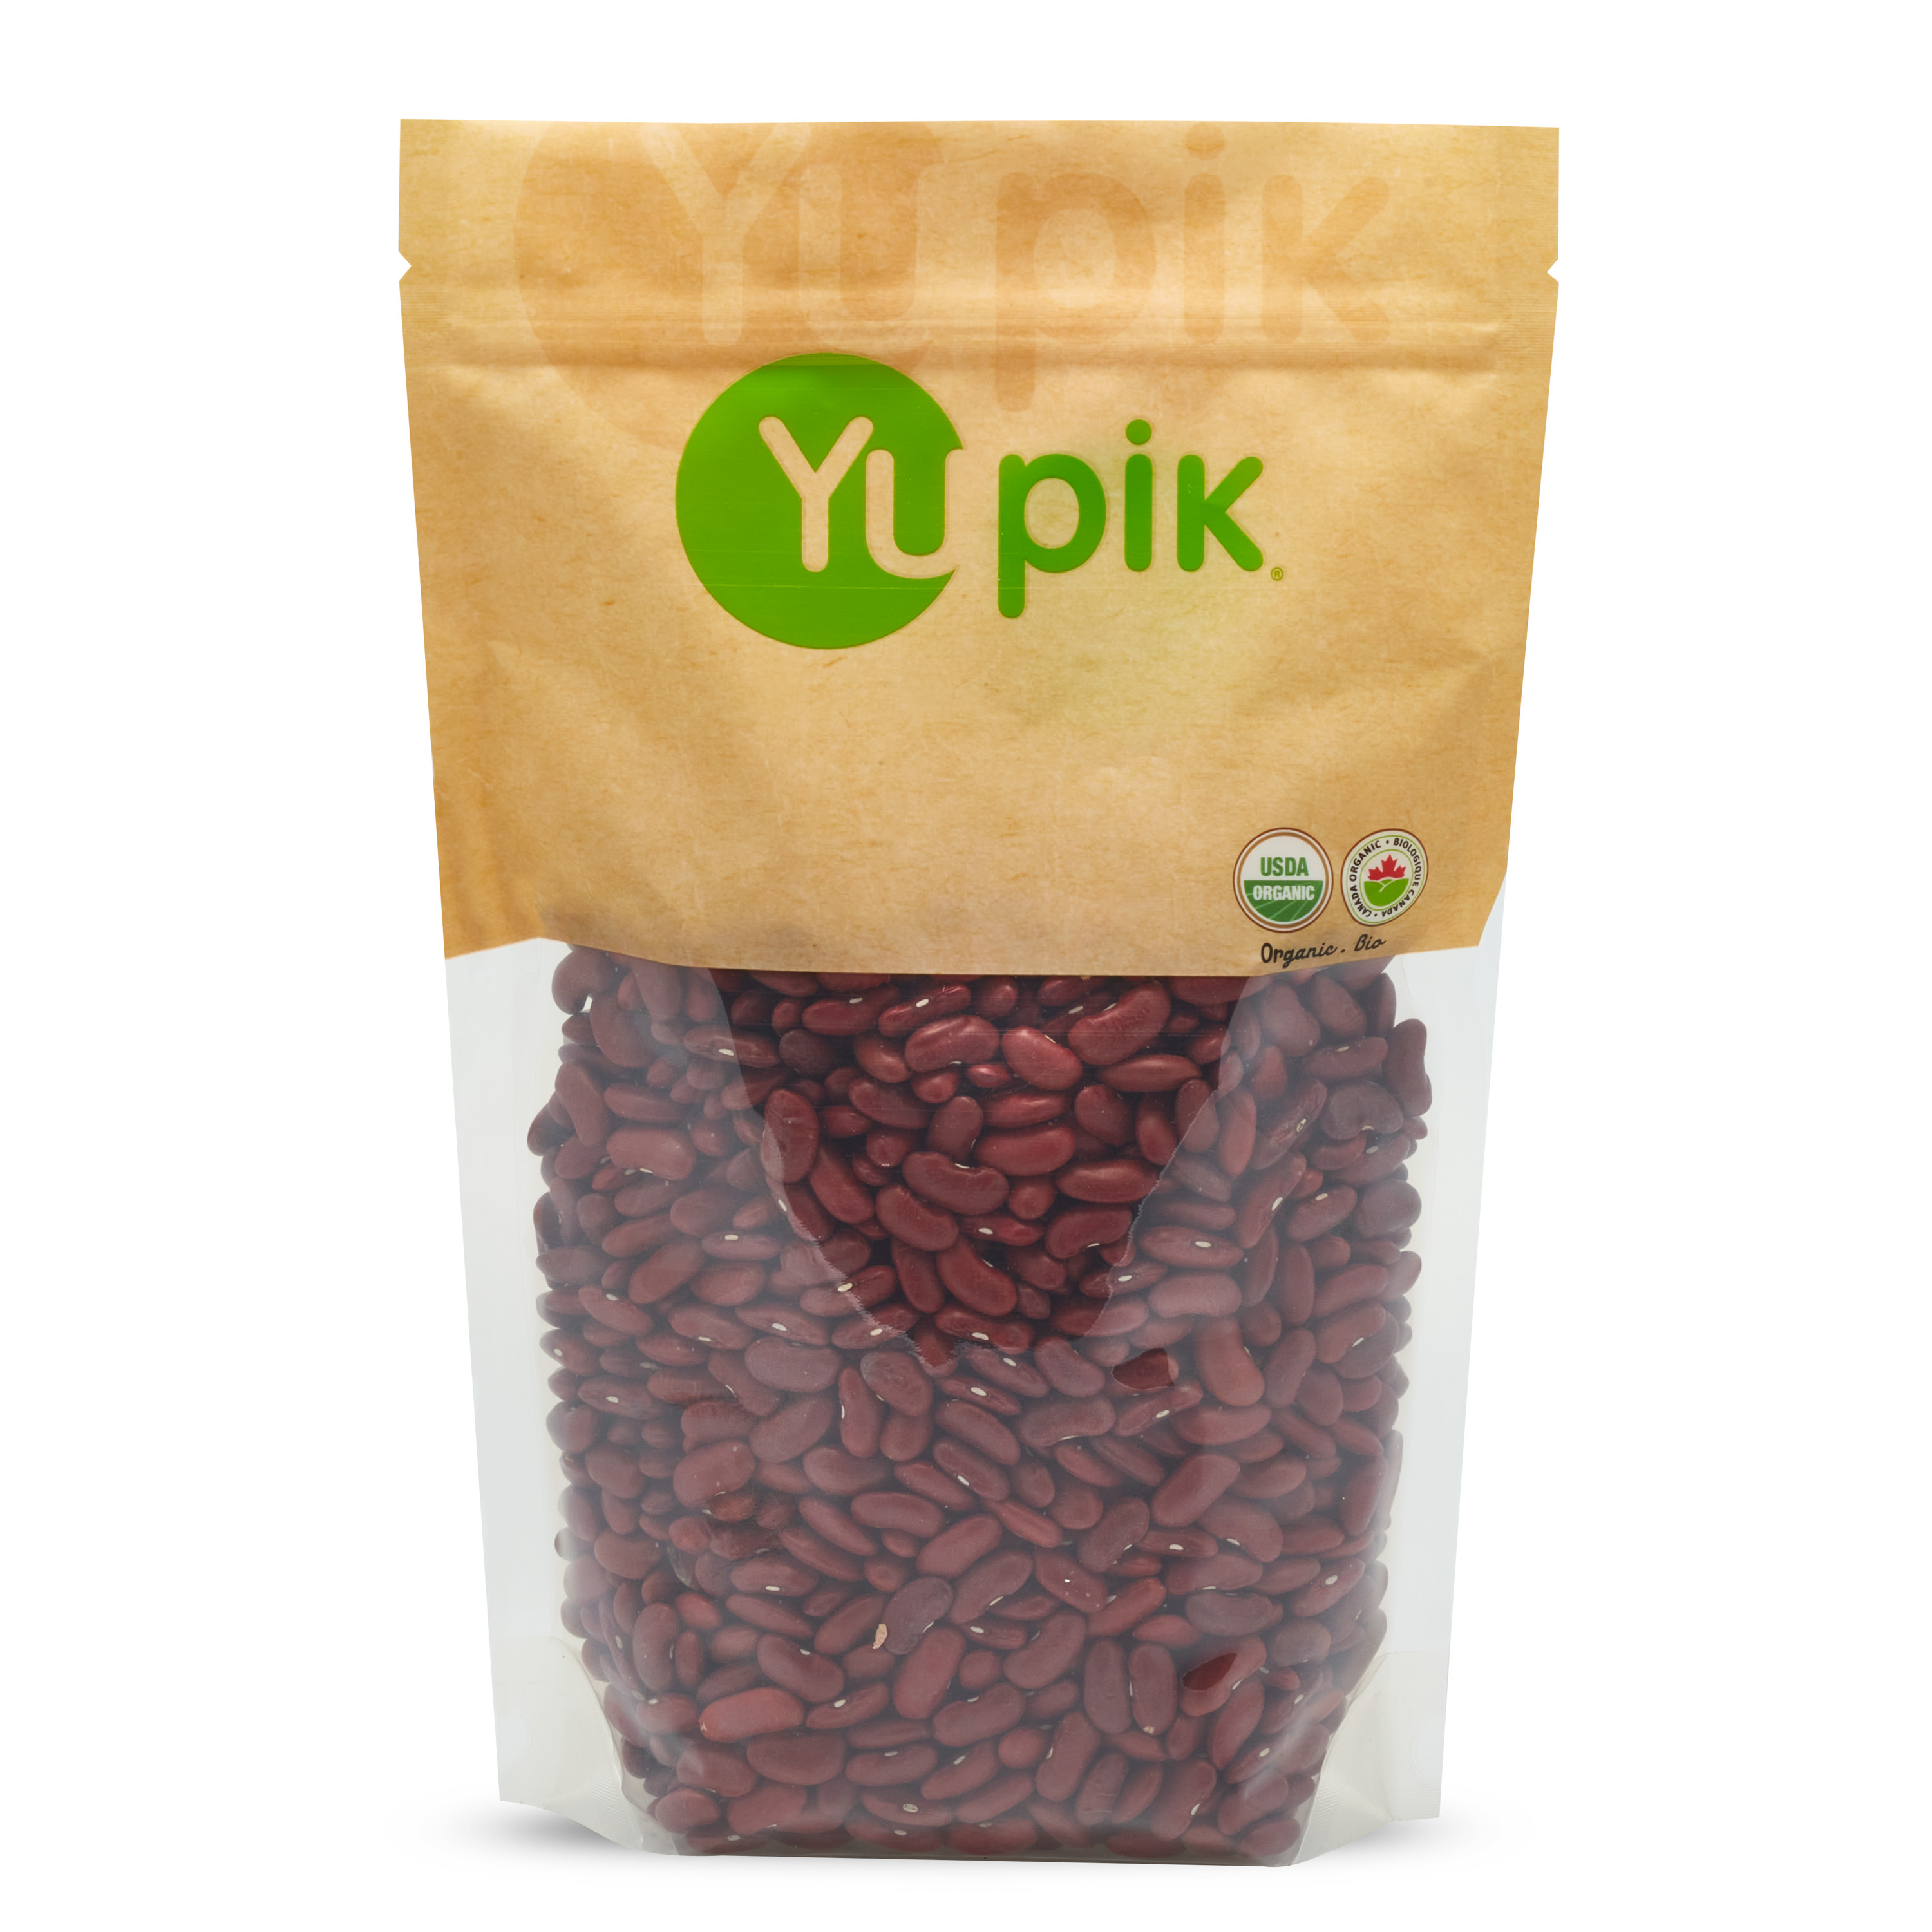 Organic red kidney beans.It is a raw agriculture product. Although it has been mechanically cleaned before packaging, some foreign material may be present. Sort and wash before using.